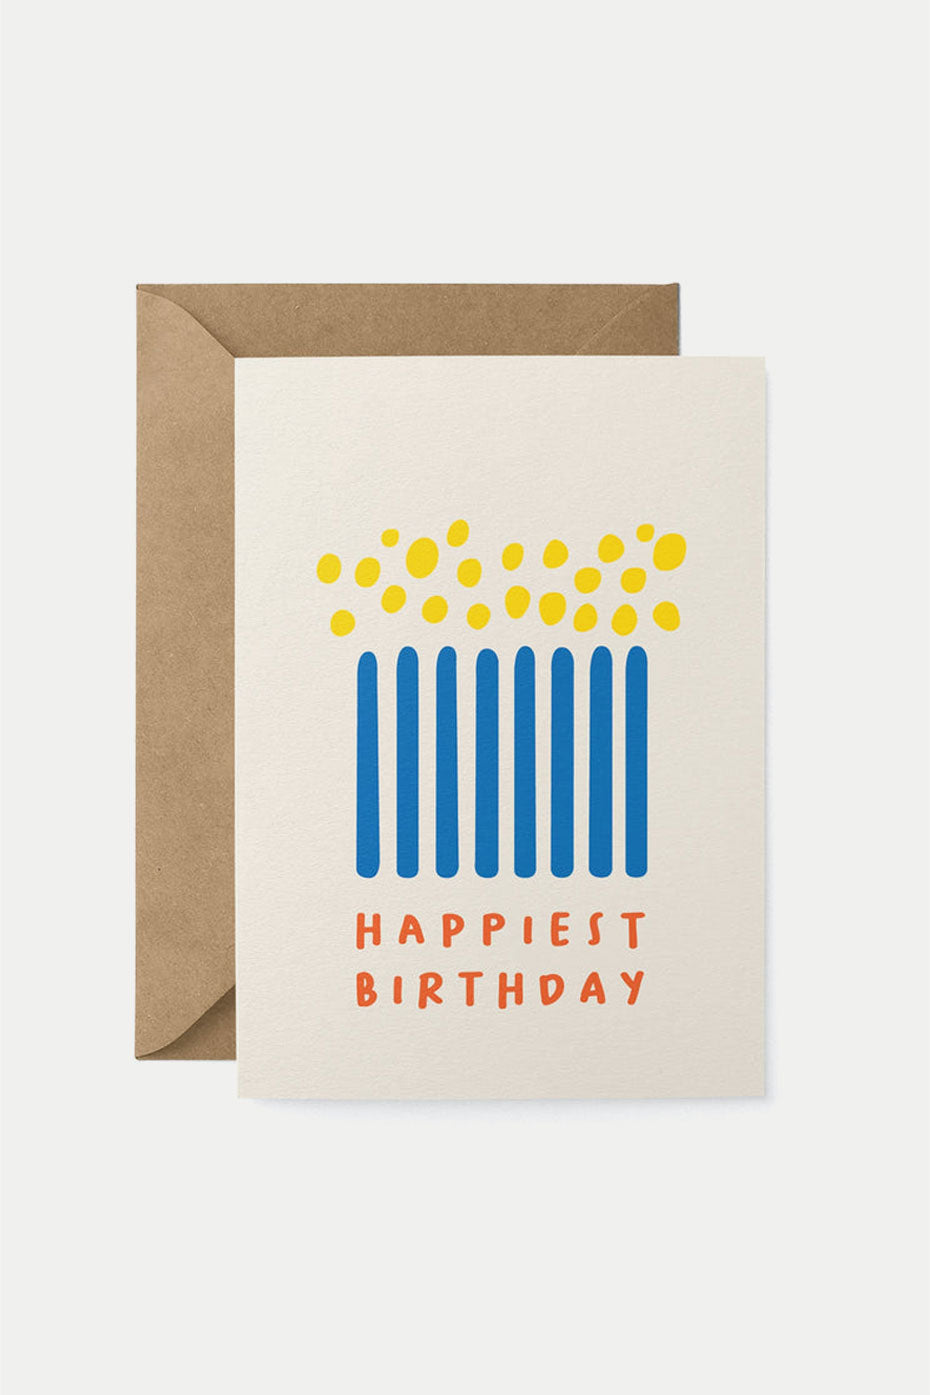 graphic  factory Happiest Birthday Card